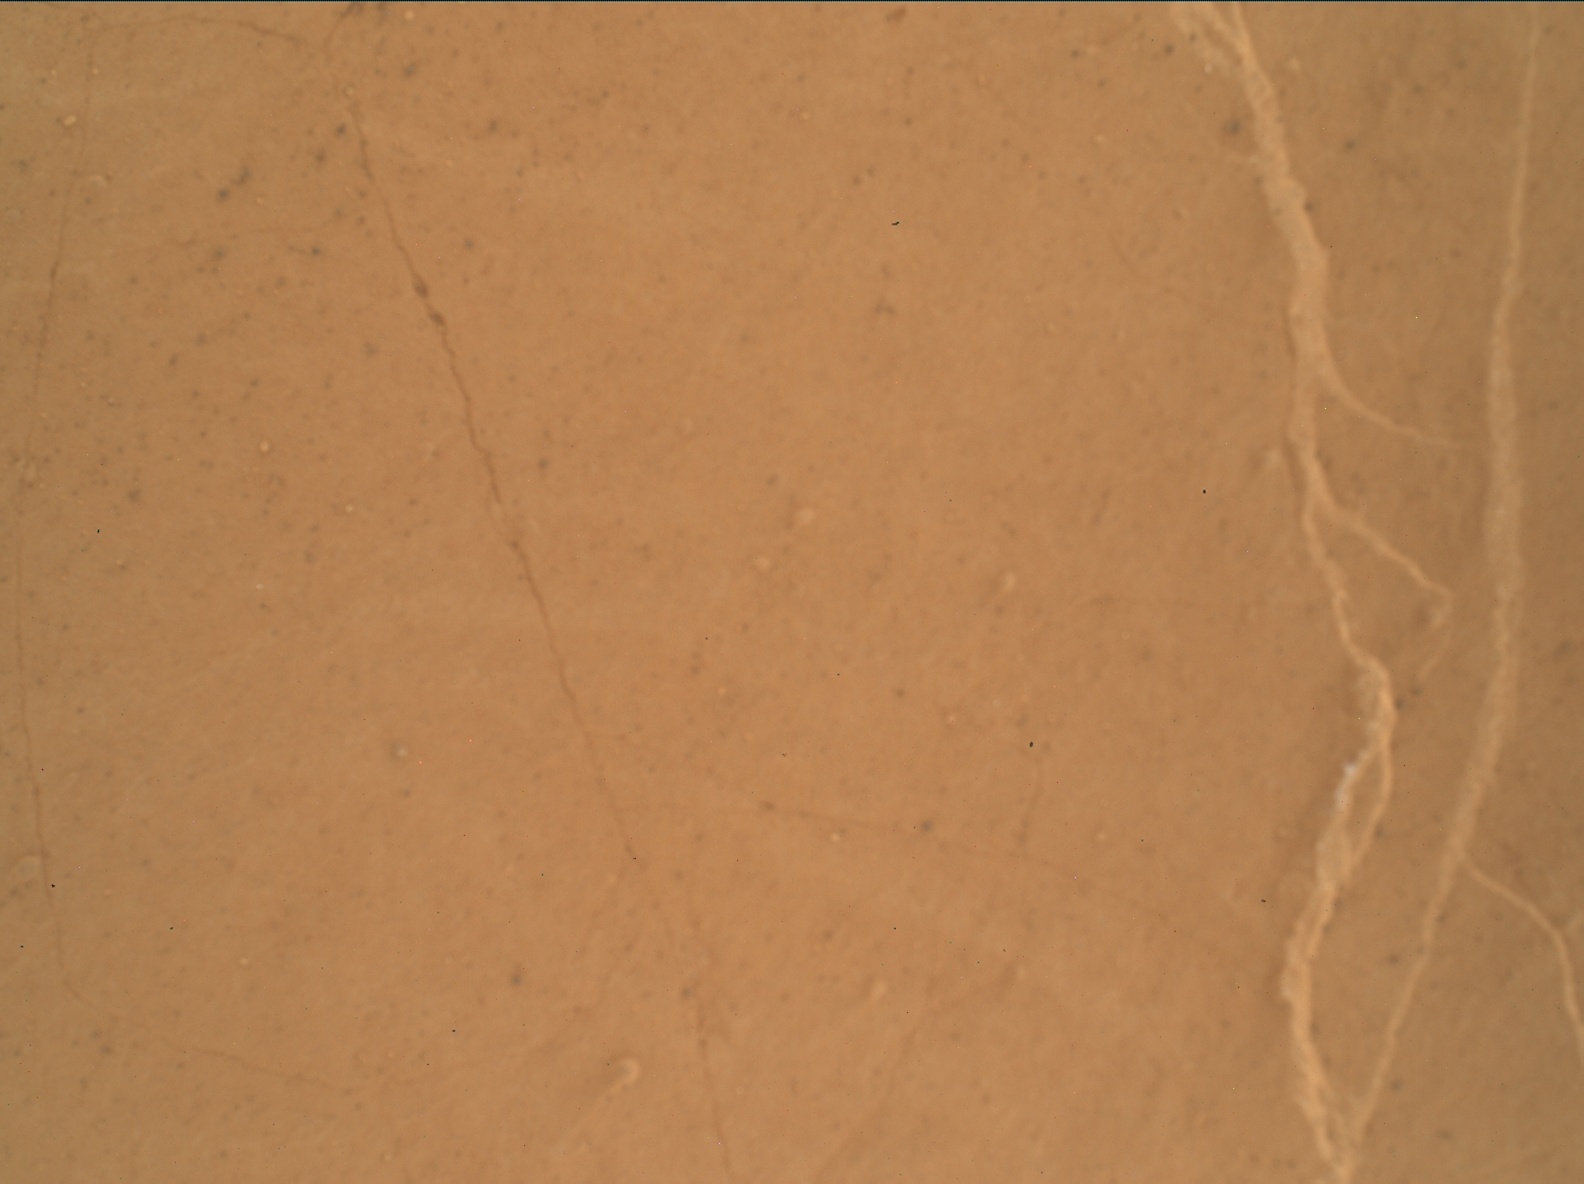 Nasa's Mars rover Curiosity acquired this image using its Mars Hand Lens Imager (MAHLI) on Sol 3081